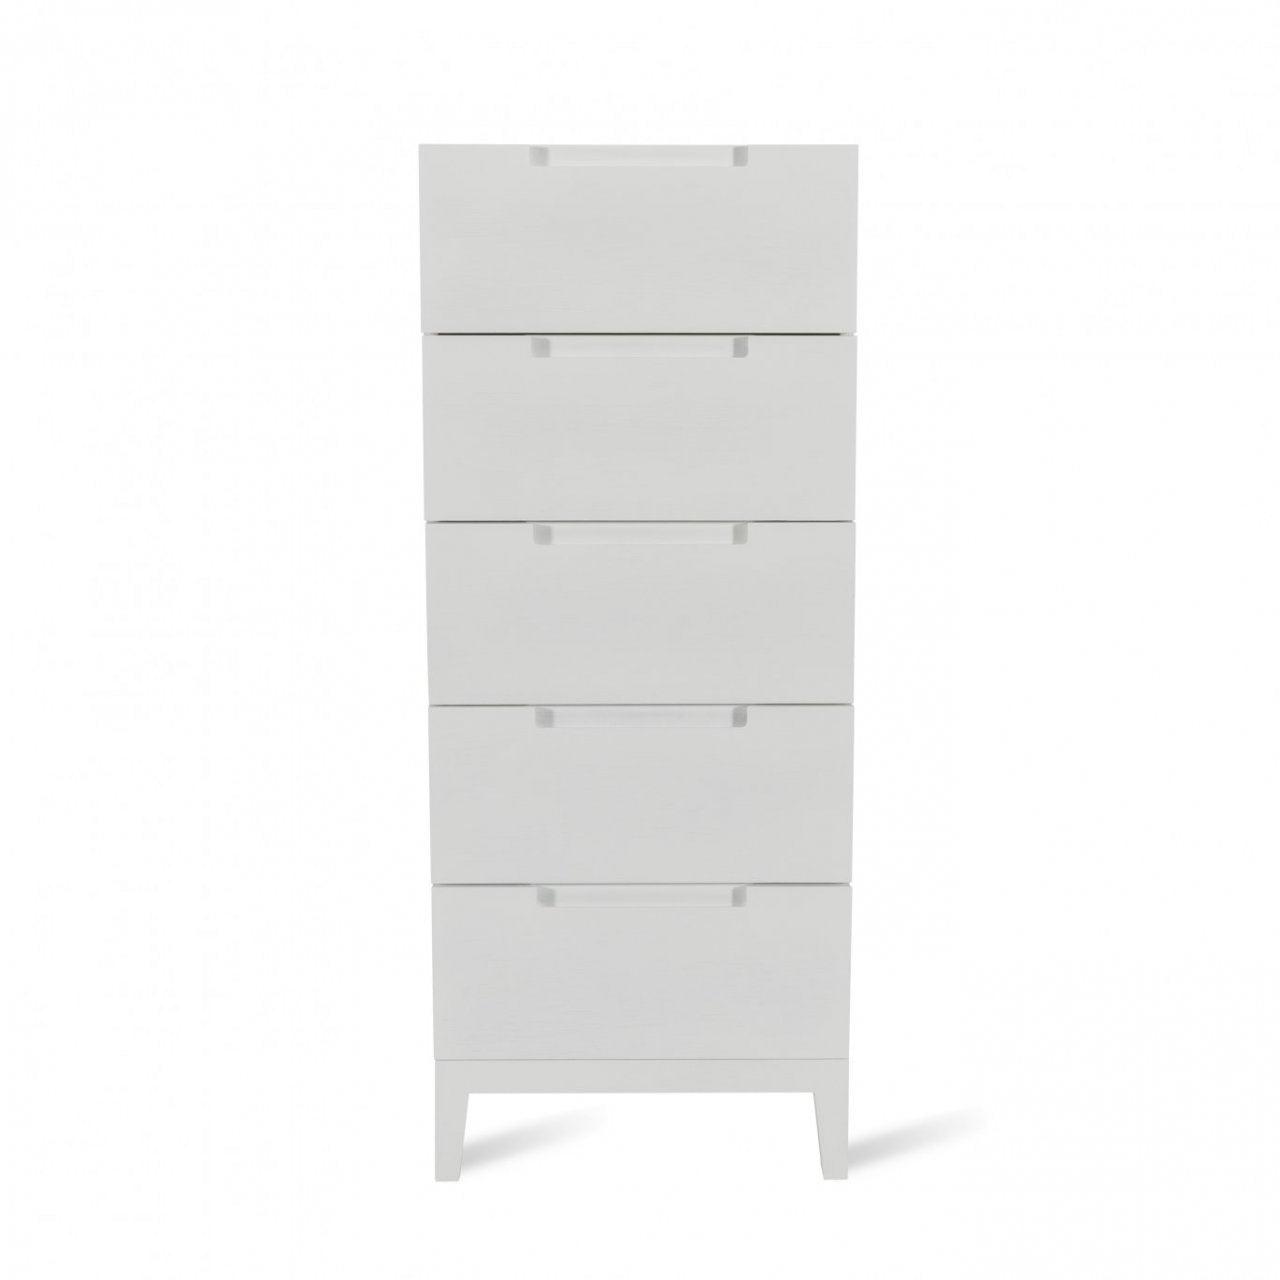 Orchid Narrow Chest of Drawers Black/white